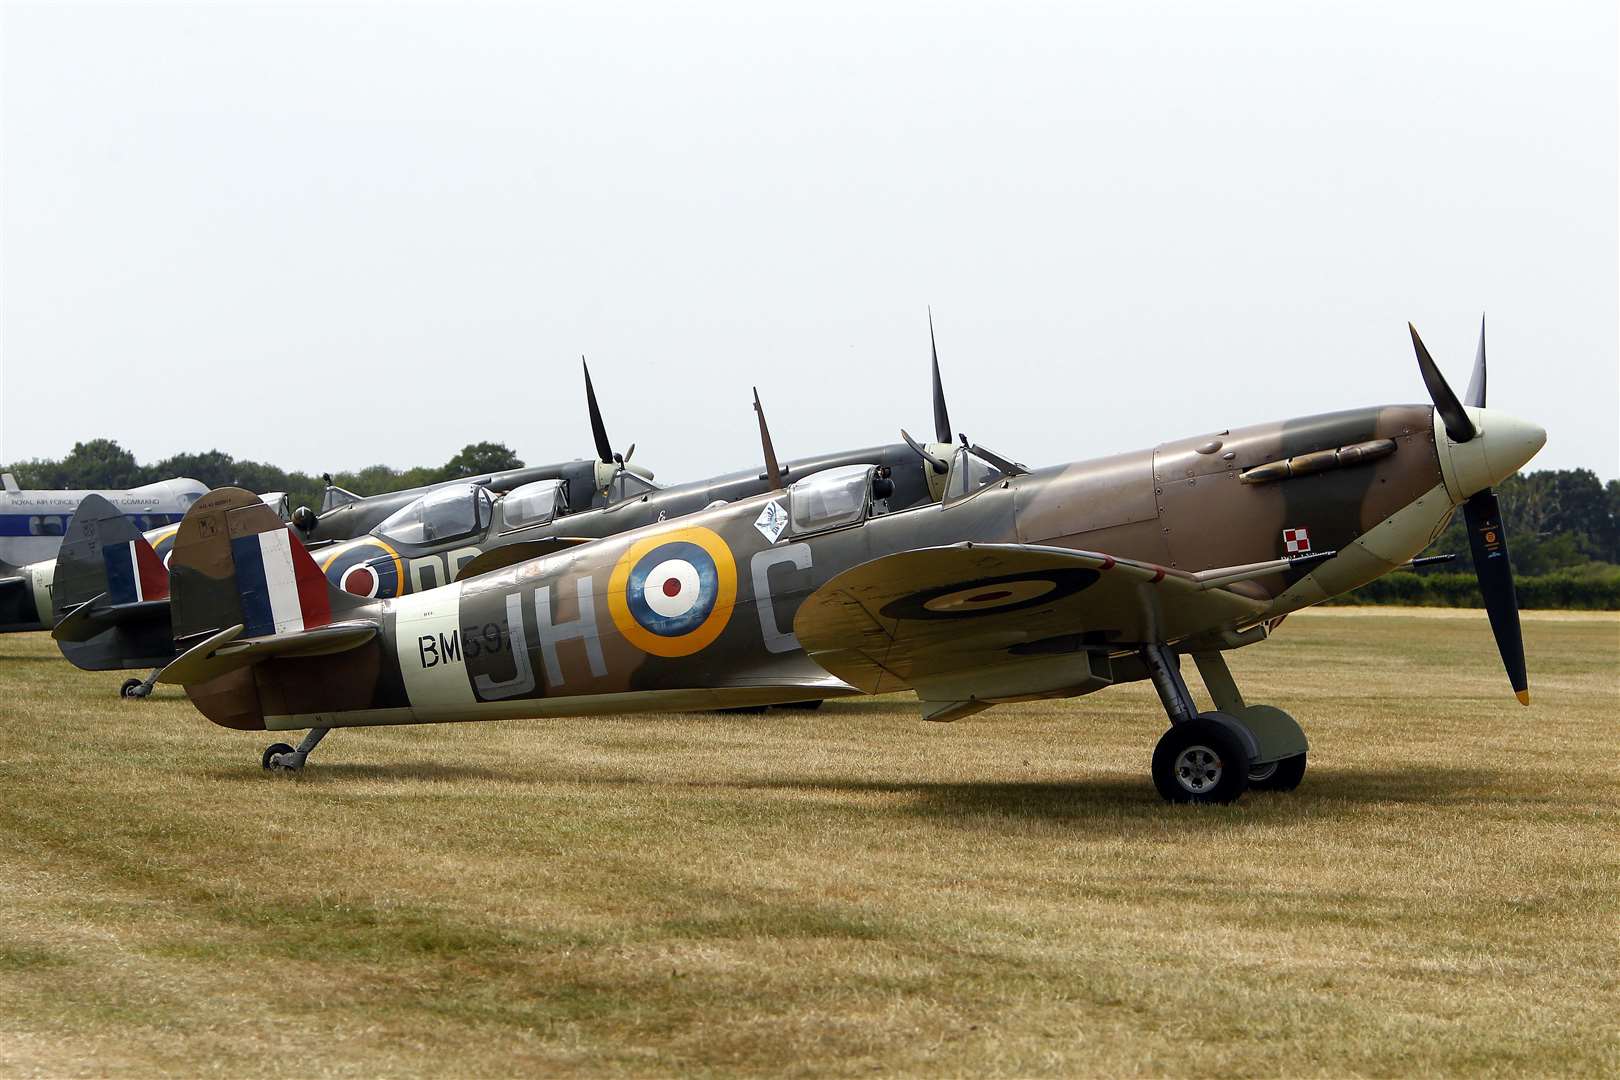 Armed Forces Day celebrations will take place at Headcorn Aerodrome on Saturday from 10am to 4pm